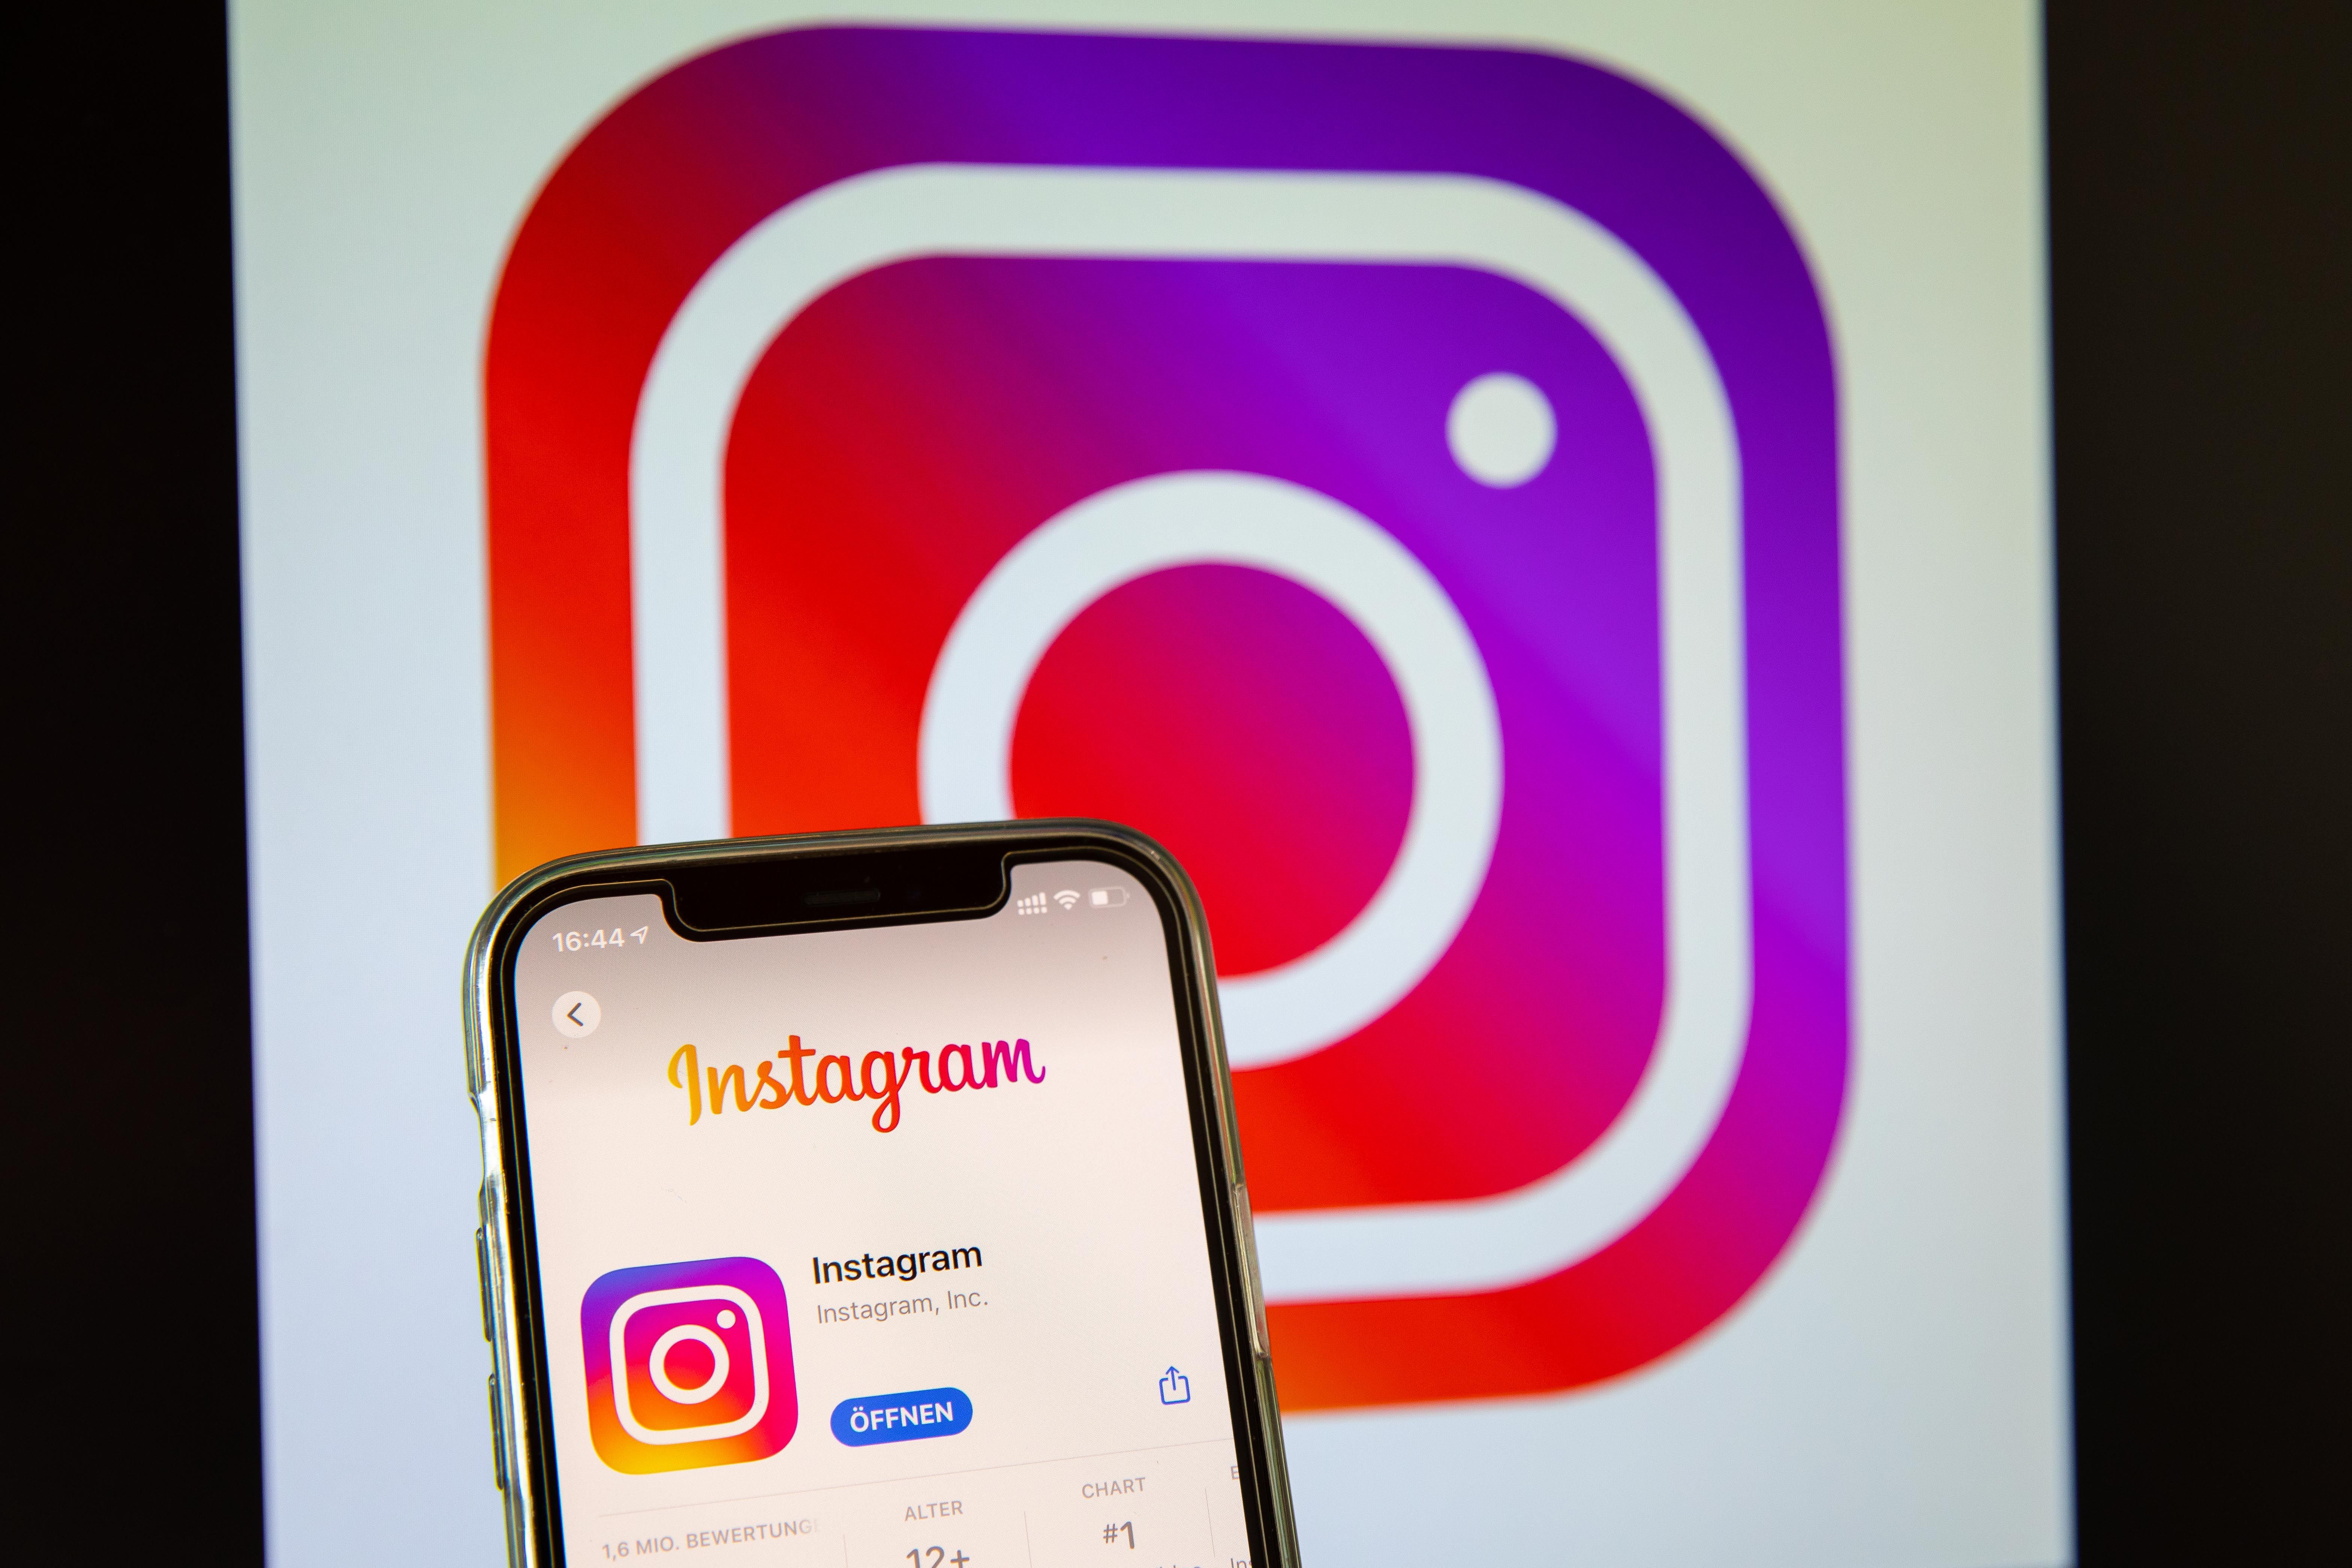 Instagram Introduces New “Favorites” Feature 2021